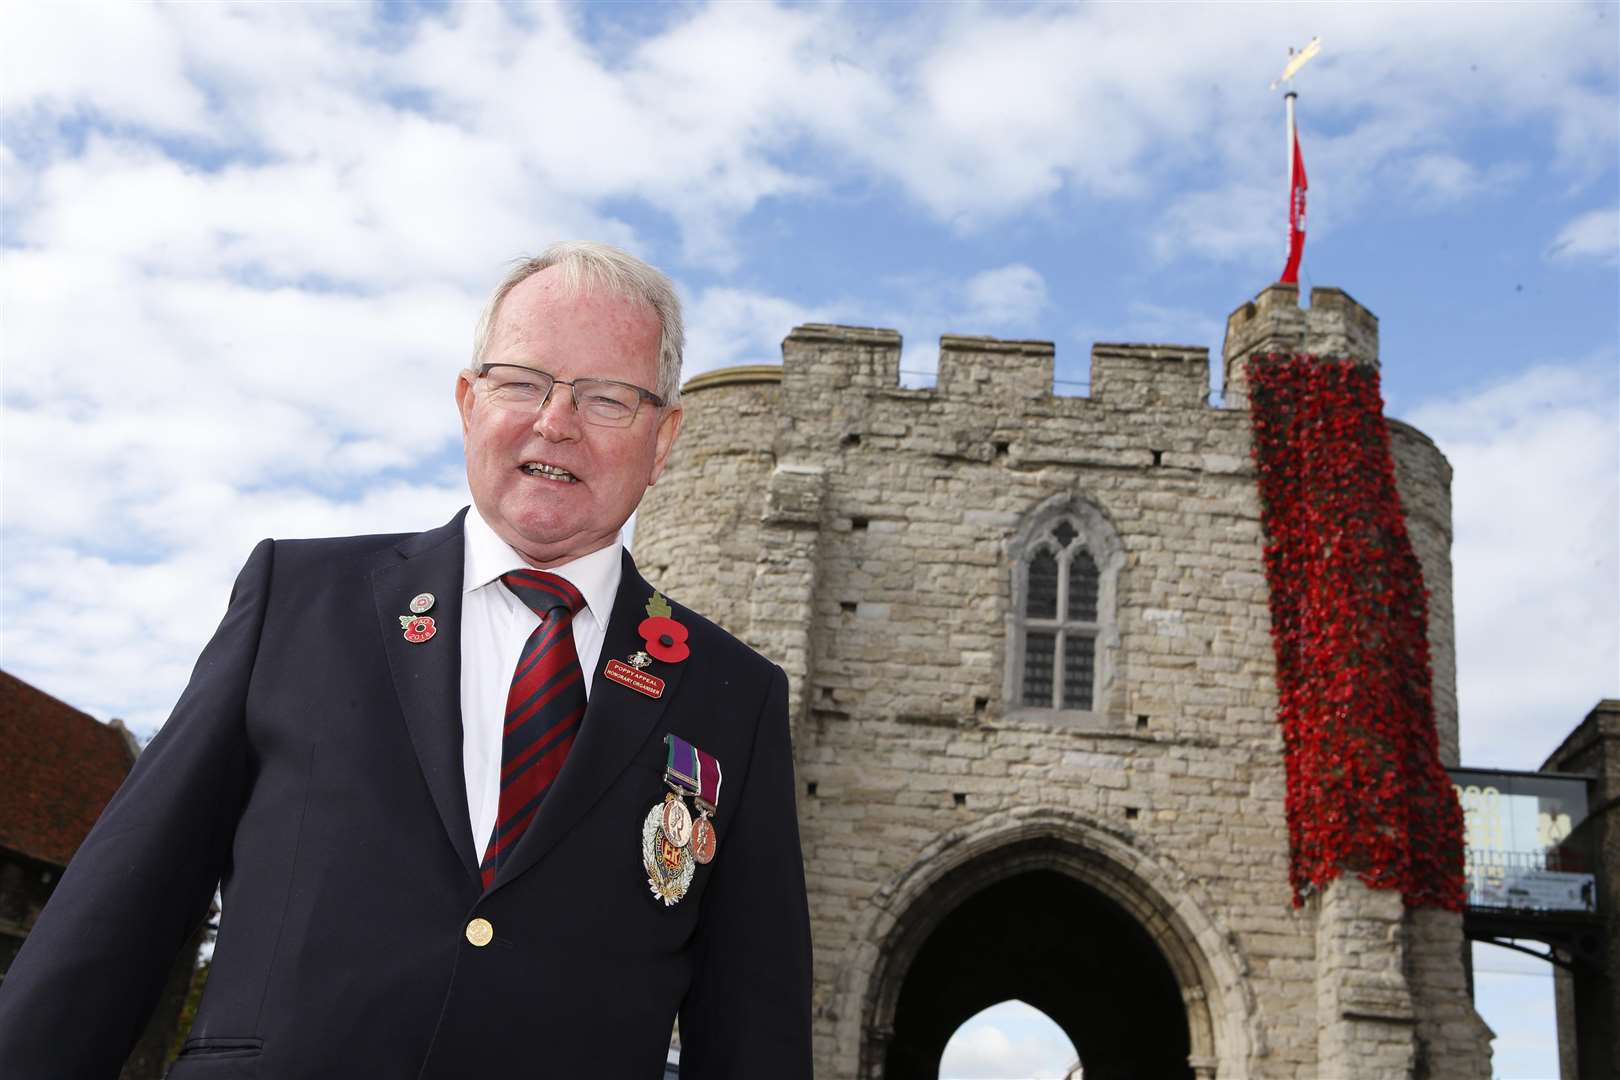 Andrew Heatlie organised the Royal British Legion poppy cascade down the Westgate Towers